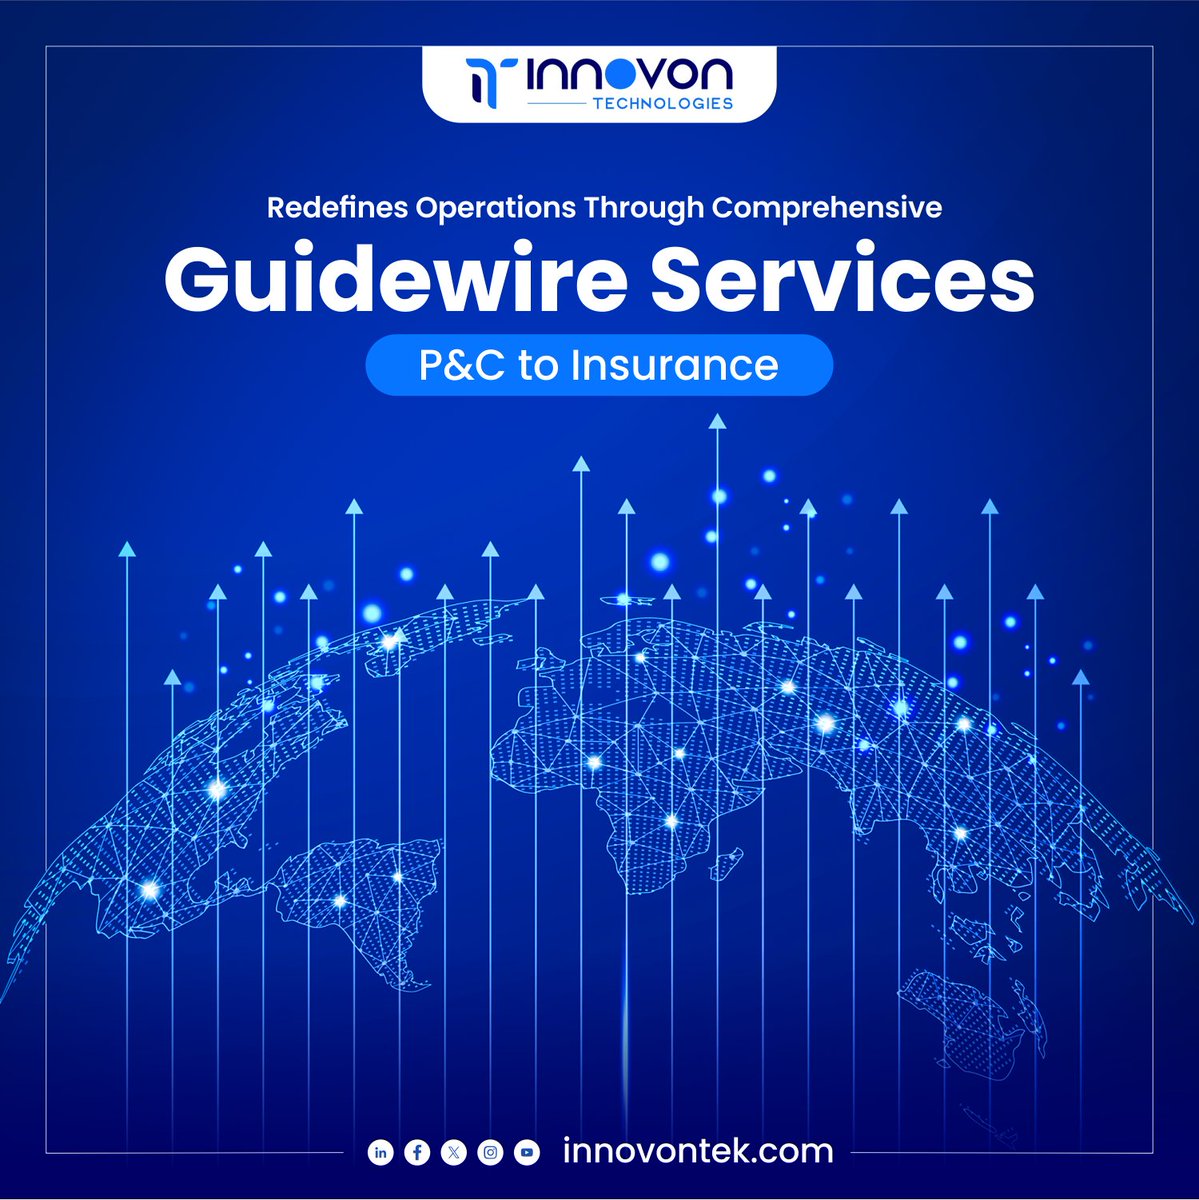 Transform Your Carrier Operations with Innovon Technologies' Guidewire Services.
Discover More!
innovontek.com/offerings

#innovon #innovontech #digitaltransformation #guidewire #insurance #innovativesolutions #innovativesolution #innovontechnologies #hyderabad #telangana #india